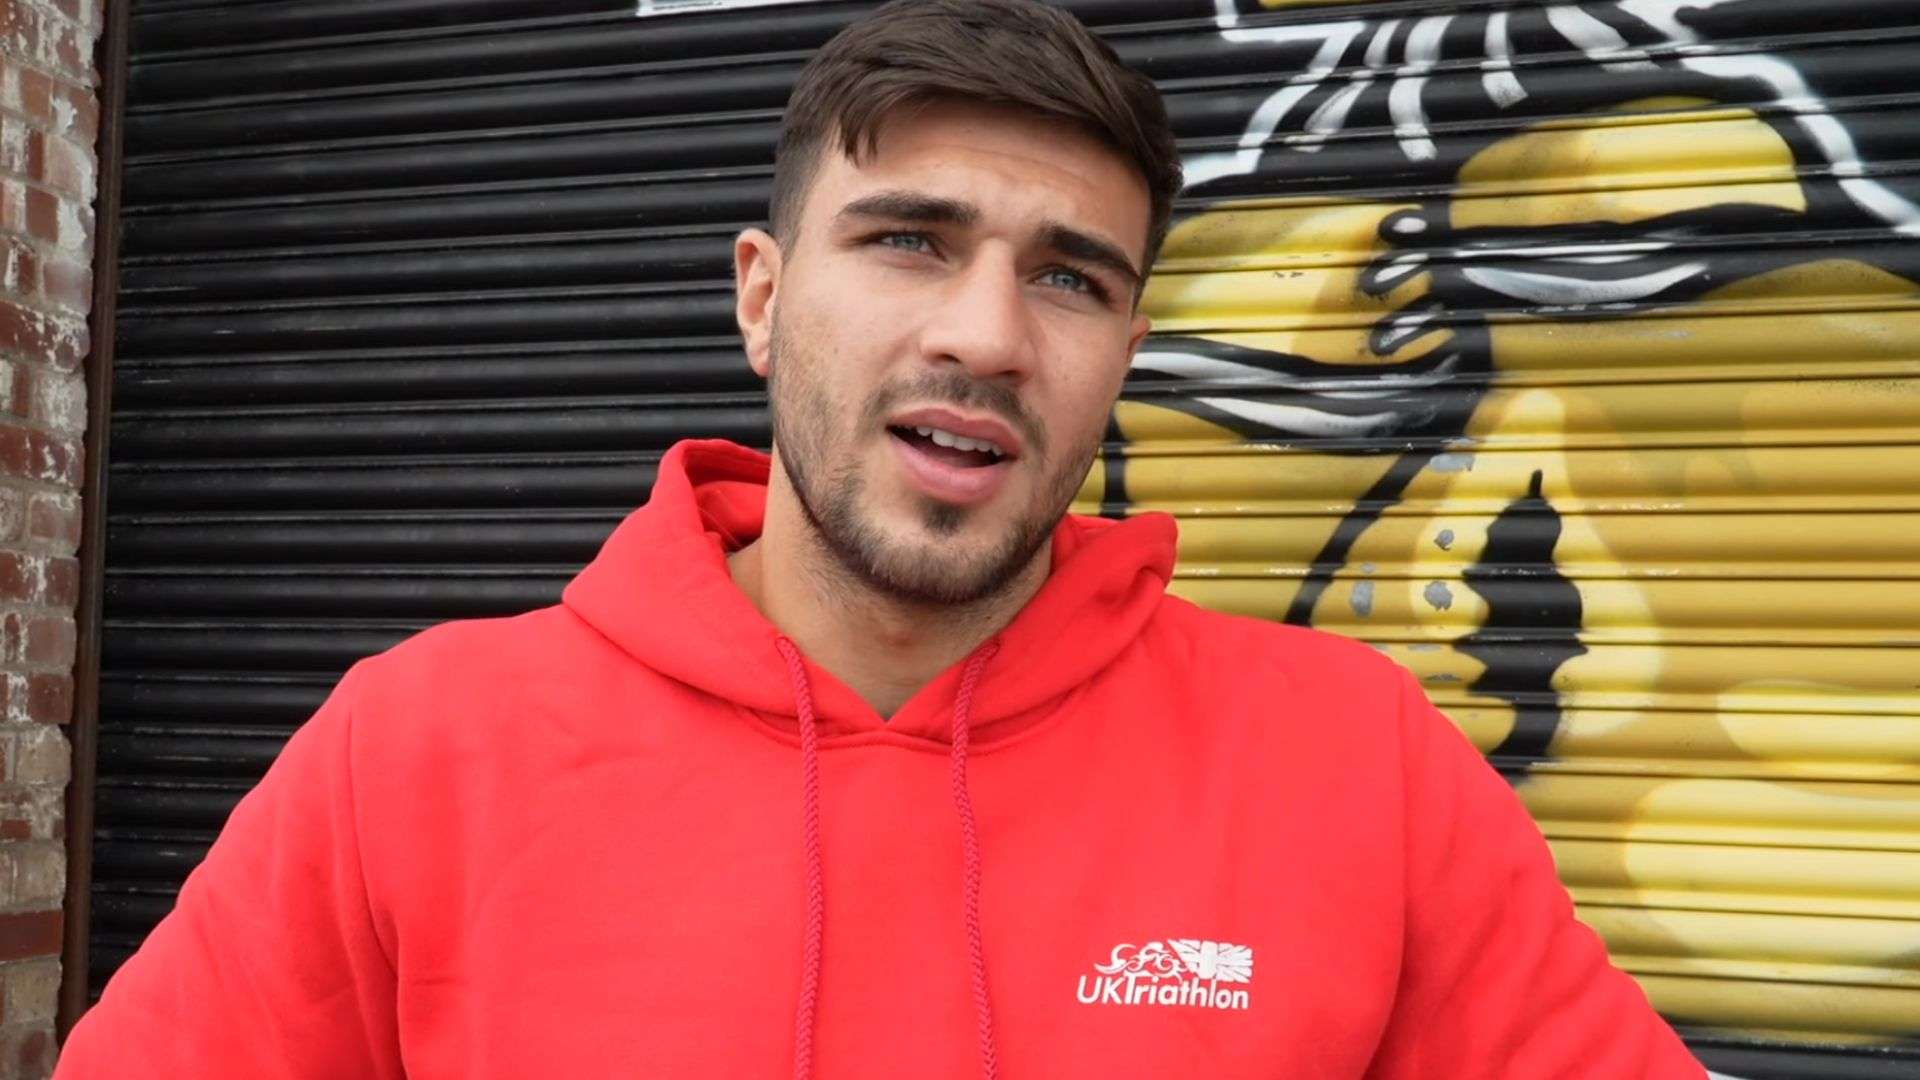 Tommy Fury in red hoodie talking to camera in front of gold boxing gloves painted on garage door